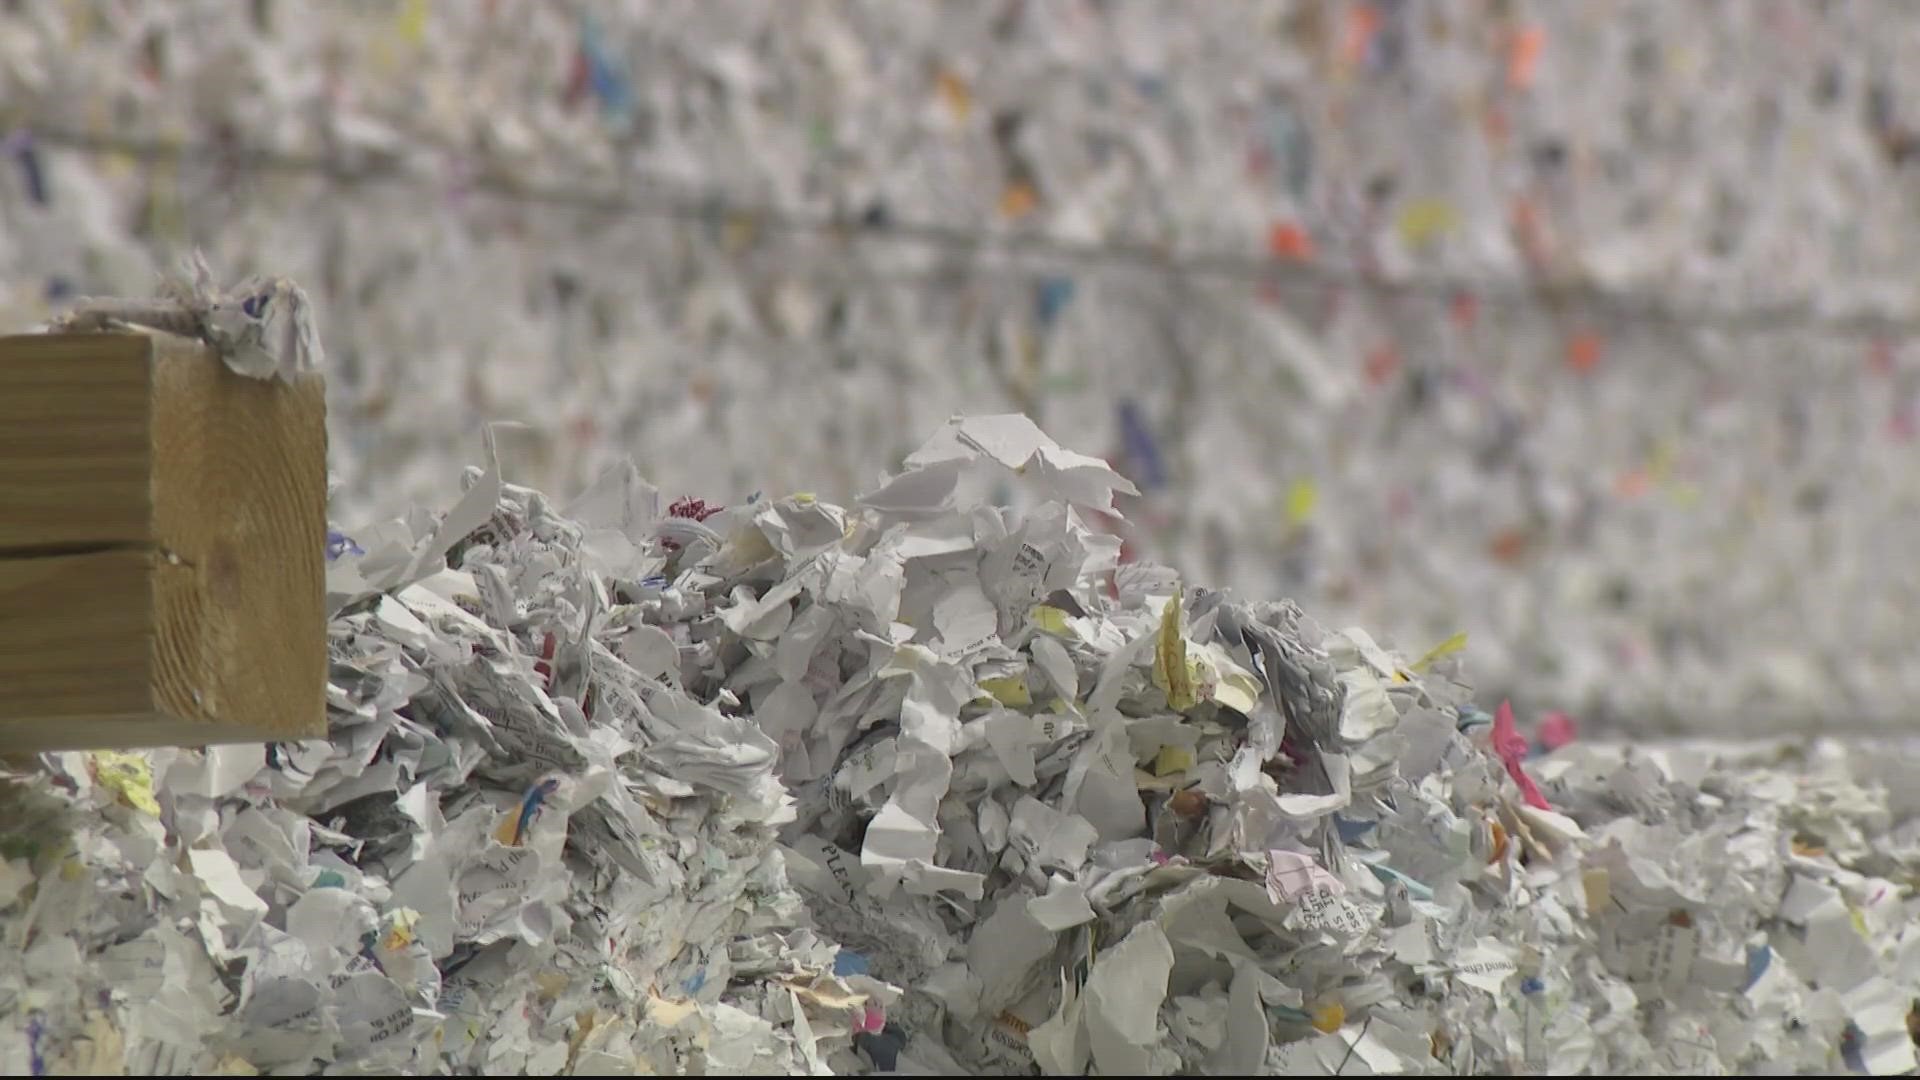 Recycle Paper - RecyclingWorks